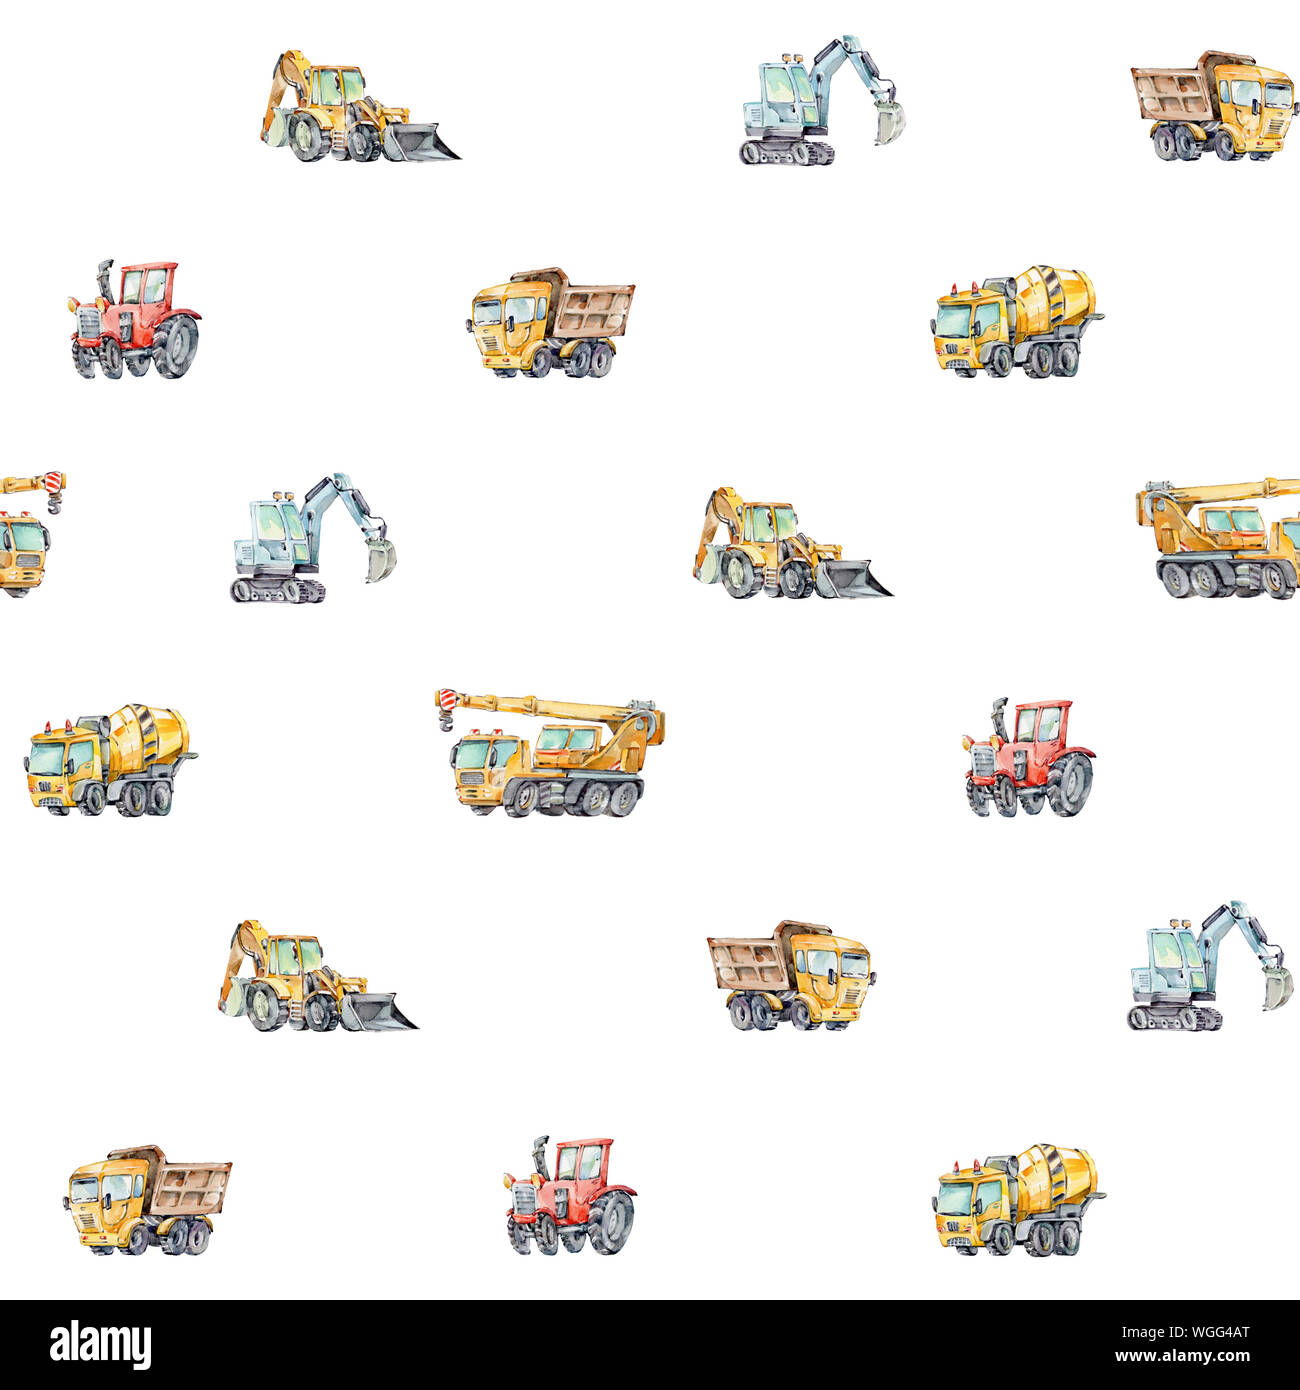 Watercolor seamless pattern with colorful little toy cars. Trucks and Cars Watercolor Background for Kids. Red tractor, Excavator, Digger machine Stock Photo